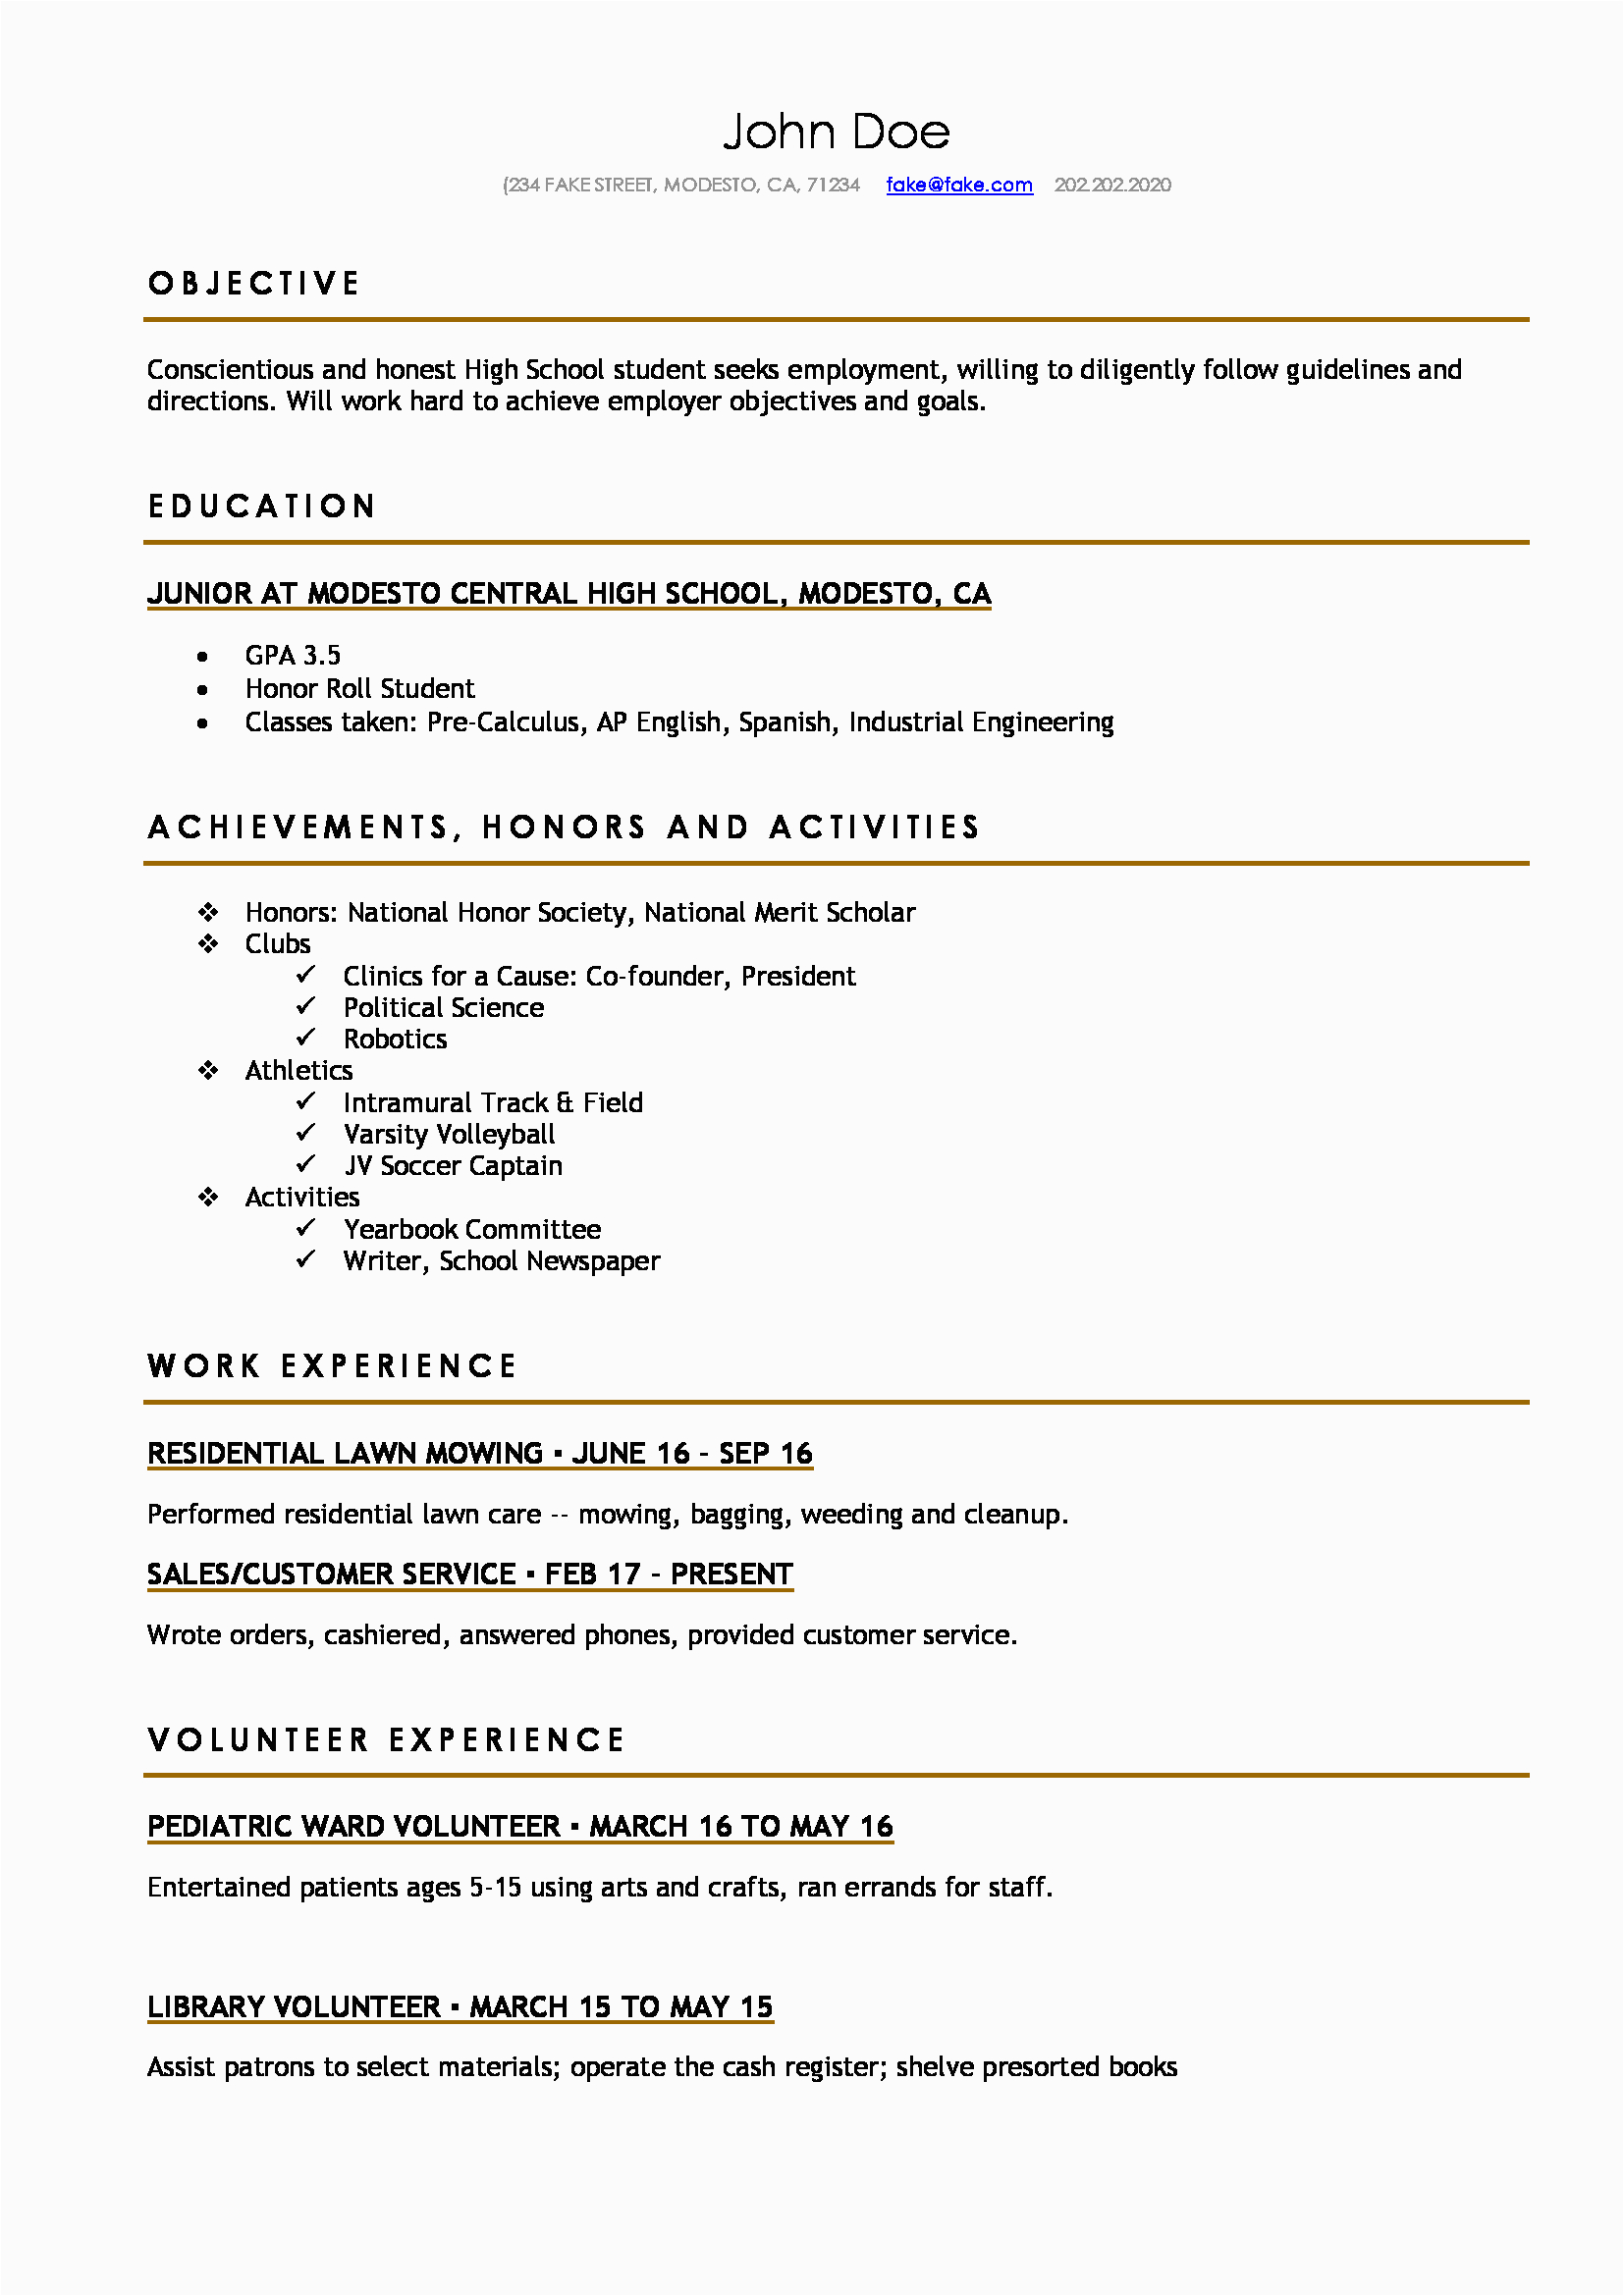 Sample Resume for High School Student for College High School Resume Resumes Perfect for High School Students